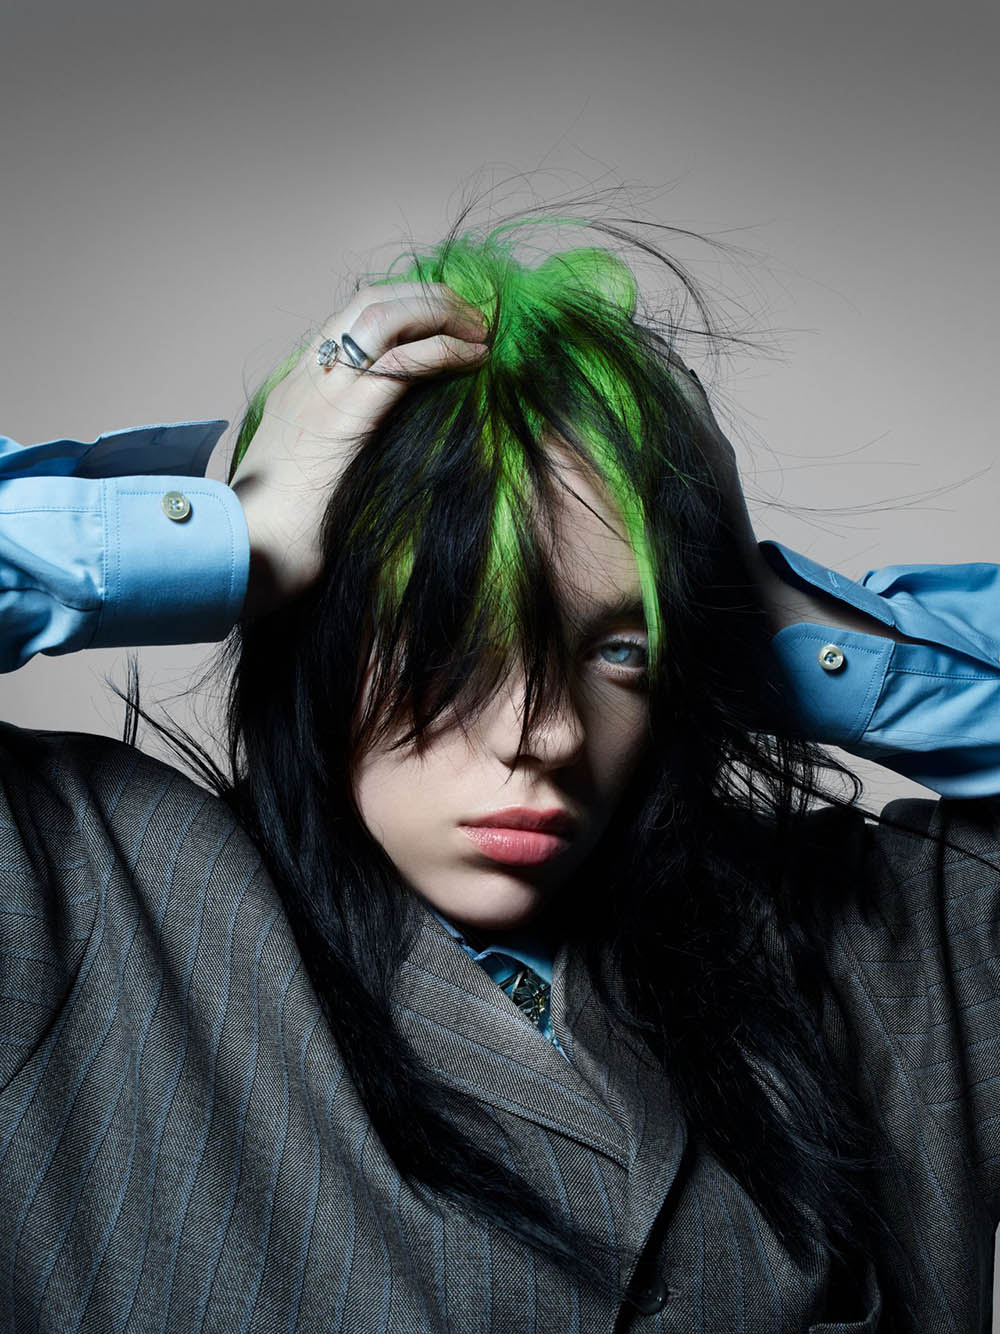 Billie Eilish covers Vogue China June 2020 by Nick Knight